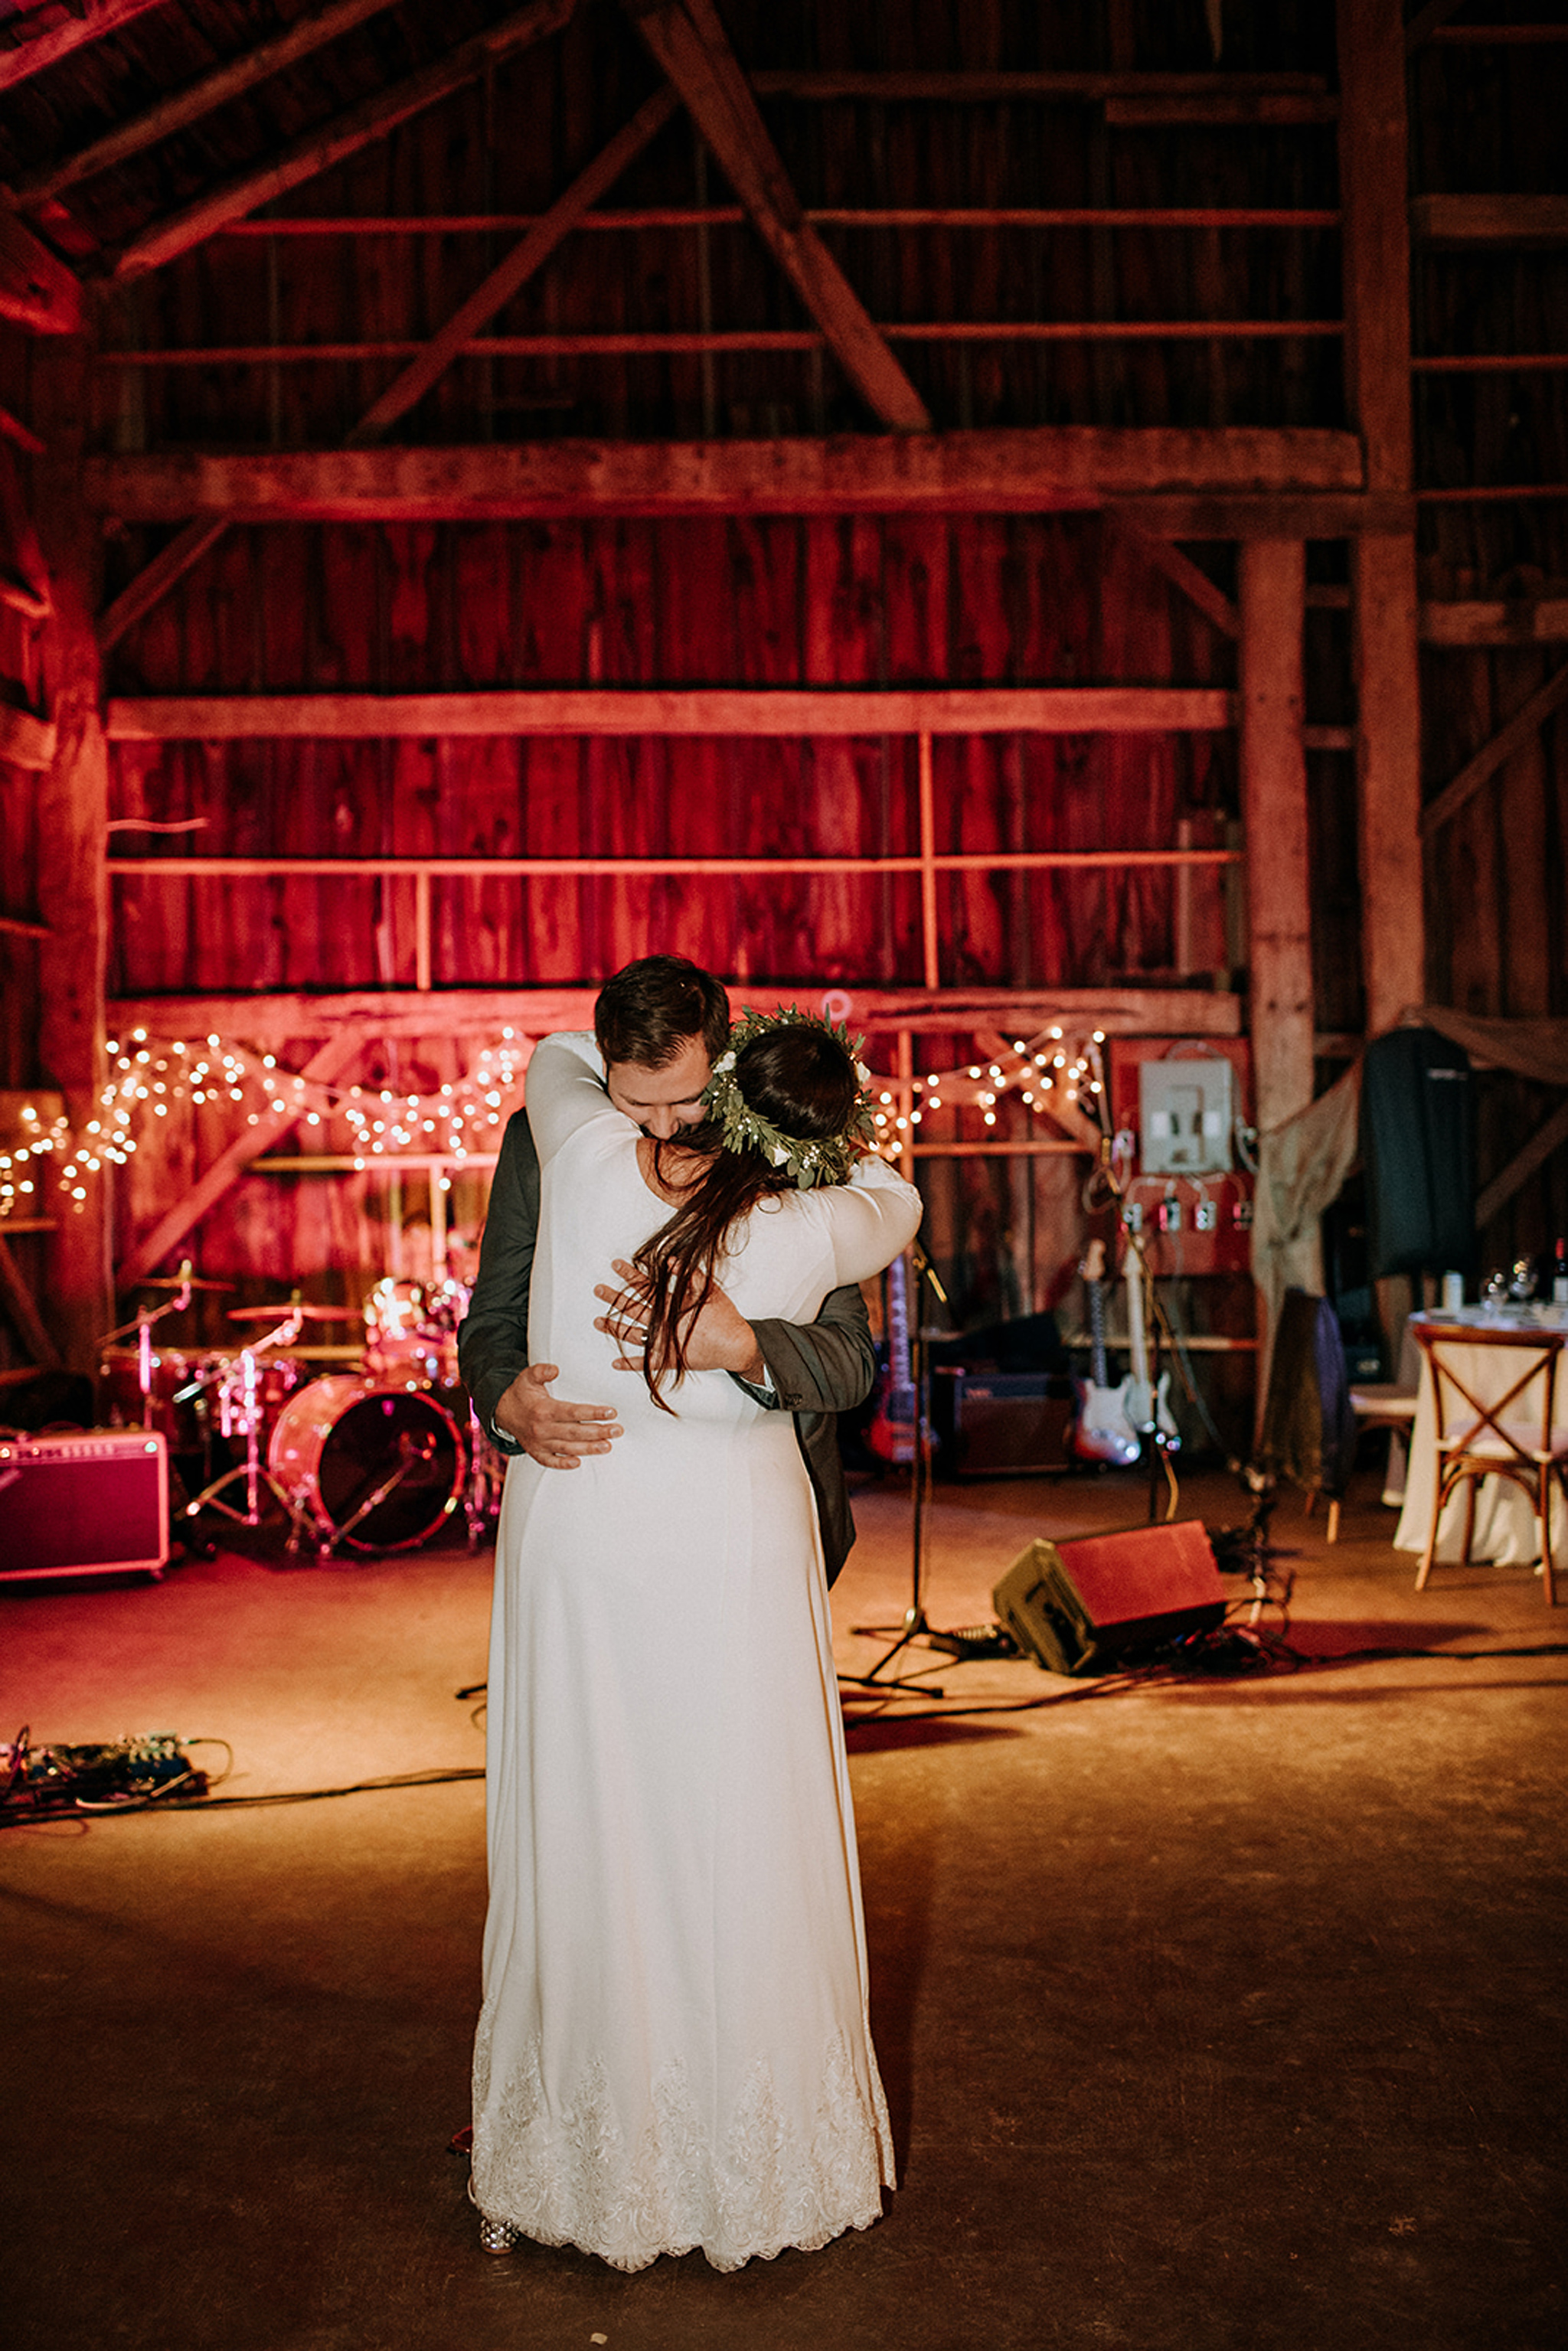 first dance at meaford barn wedding with twinkly lights